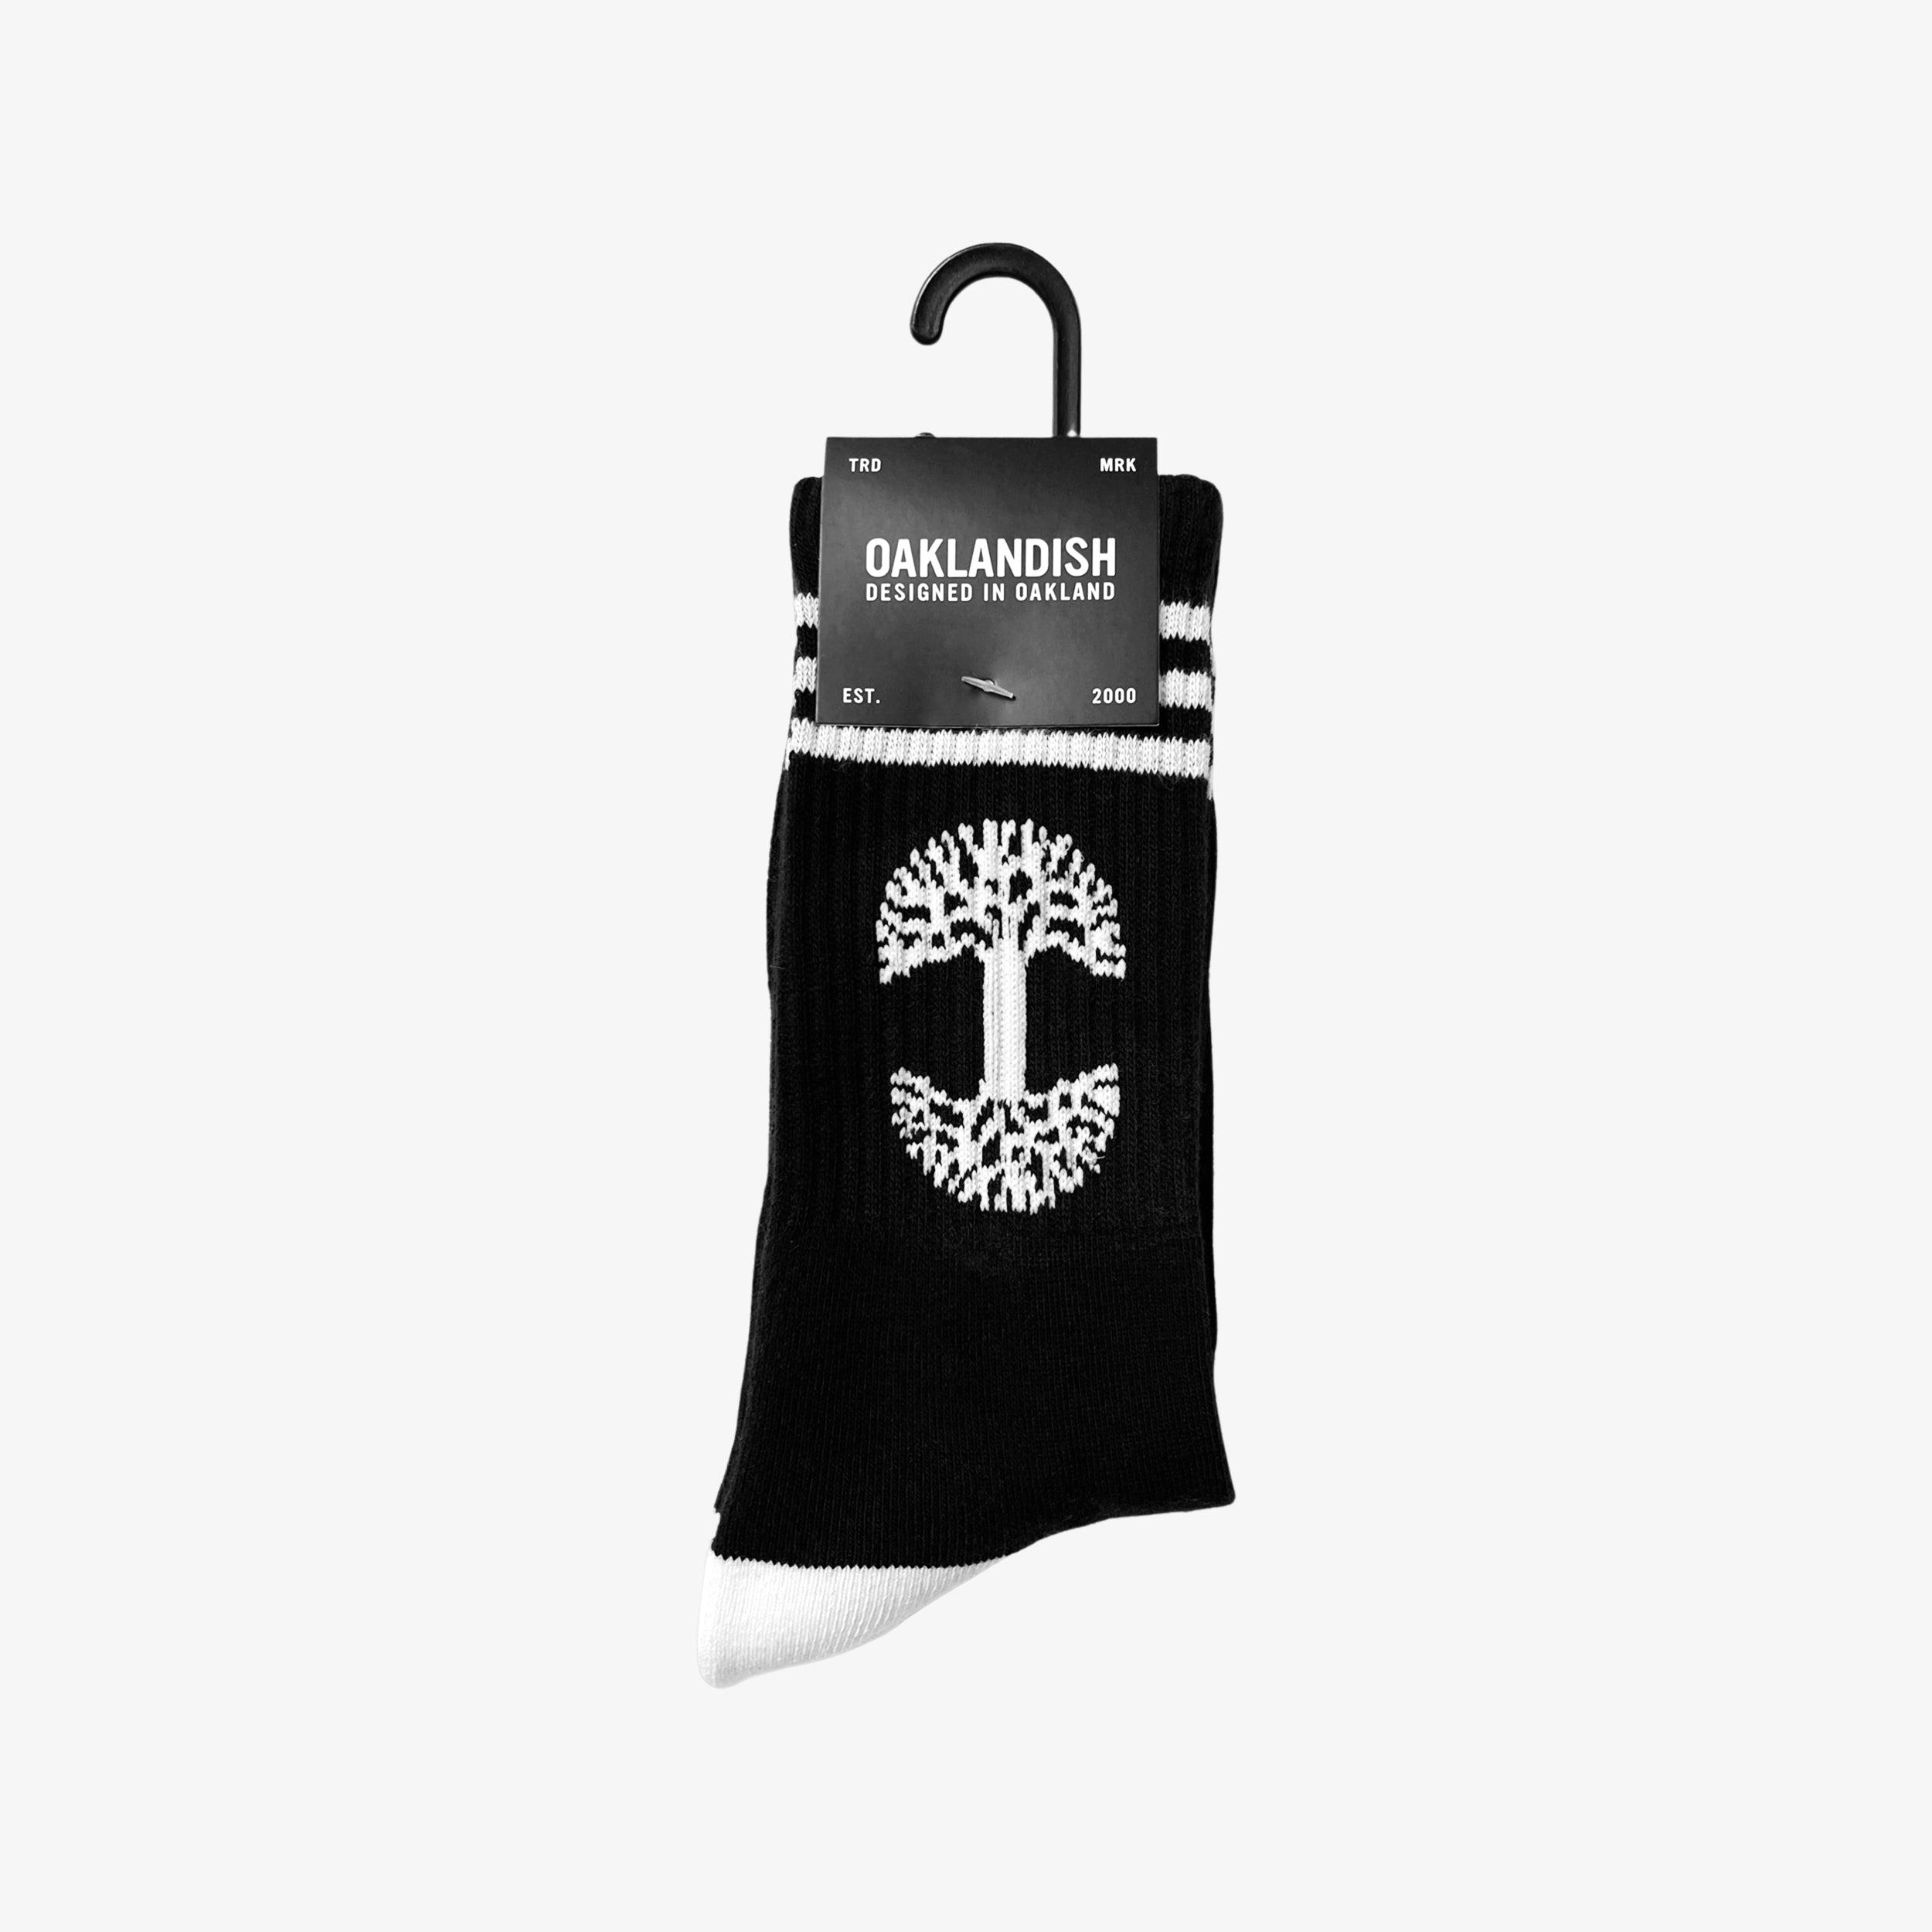 Black crew socks with a white Oaklandish tree logo and white ankle stripes in Oaklandish retail packaging.